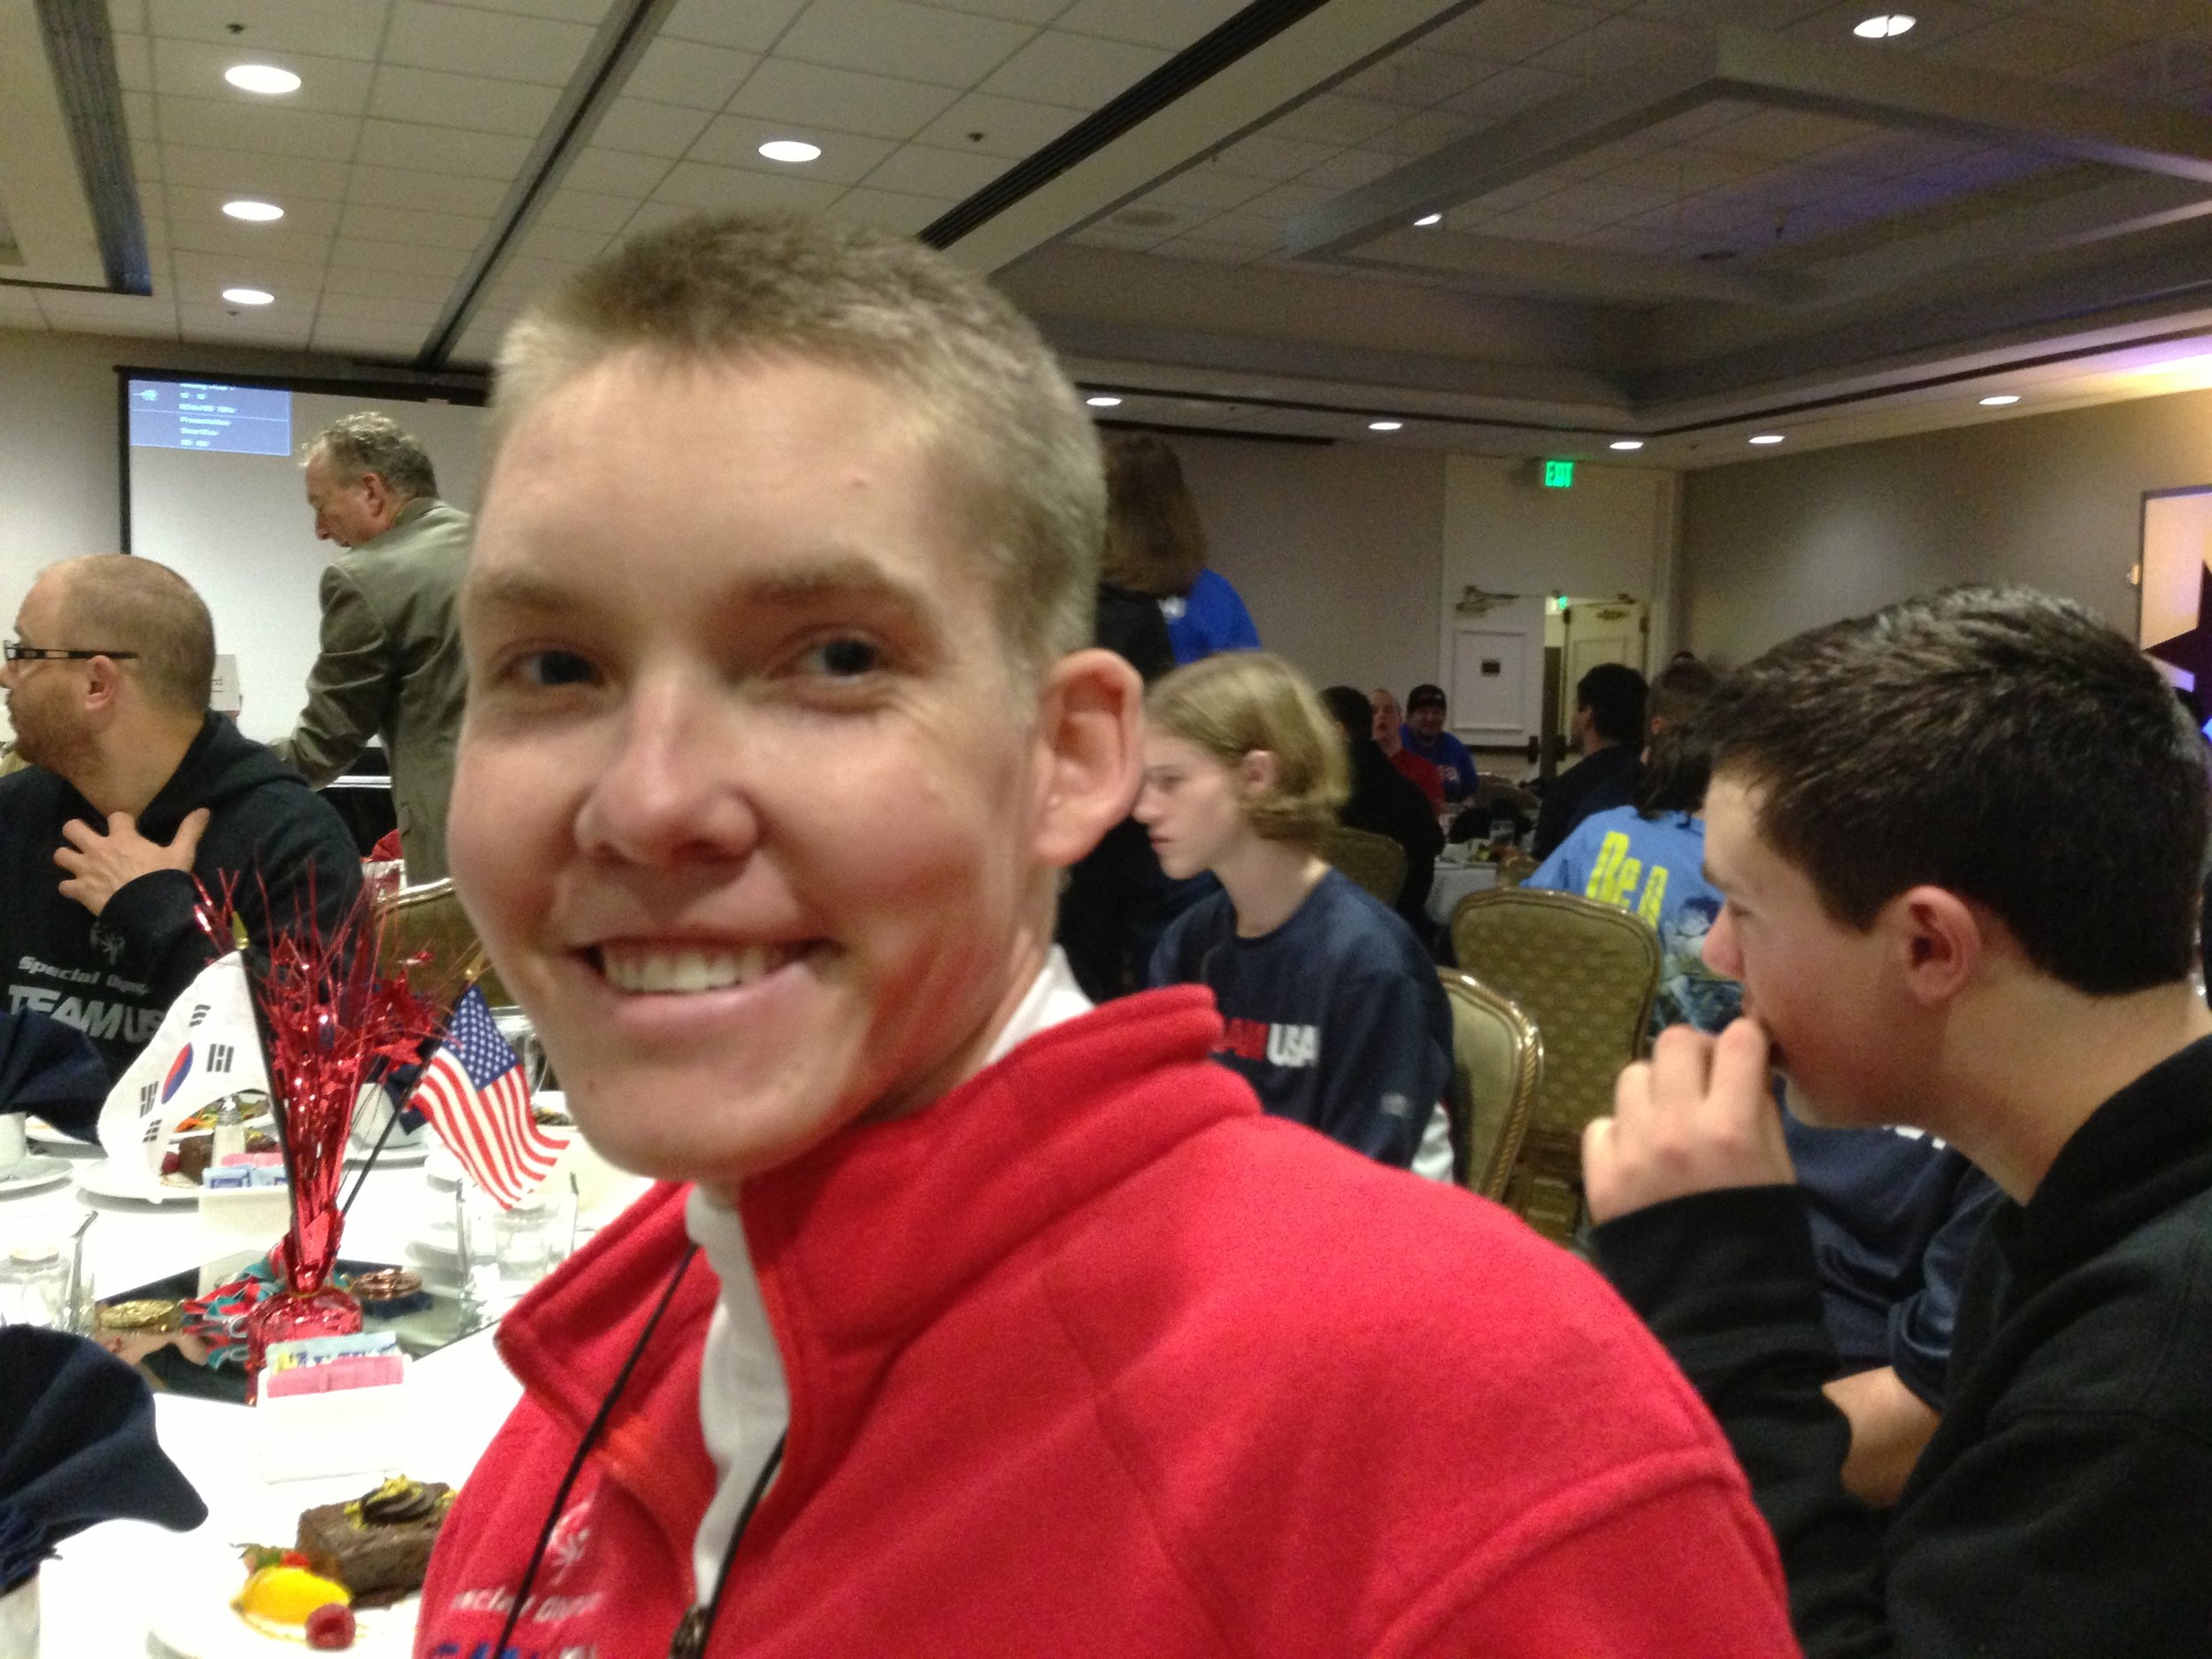 Chase Lodder, 25, of Salt Lake City, Special Olympics snowboarder